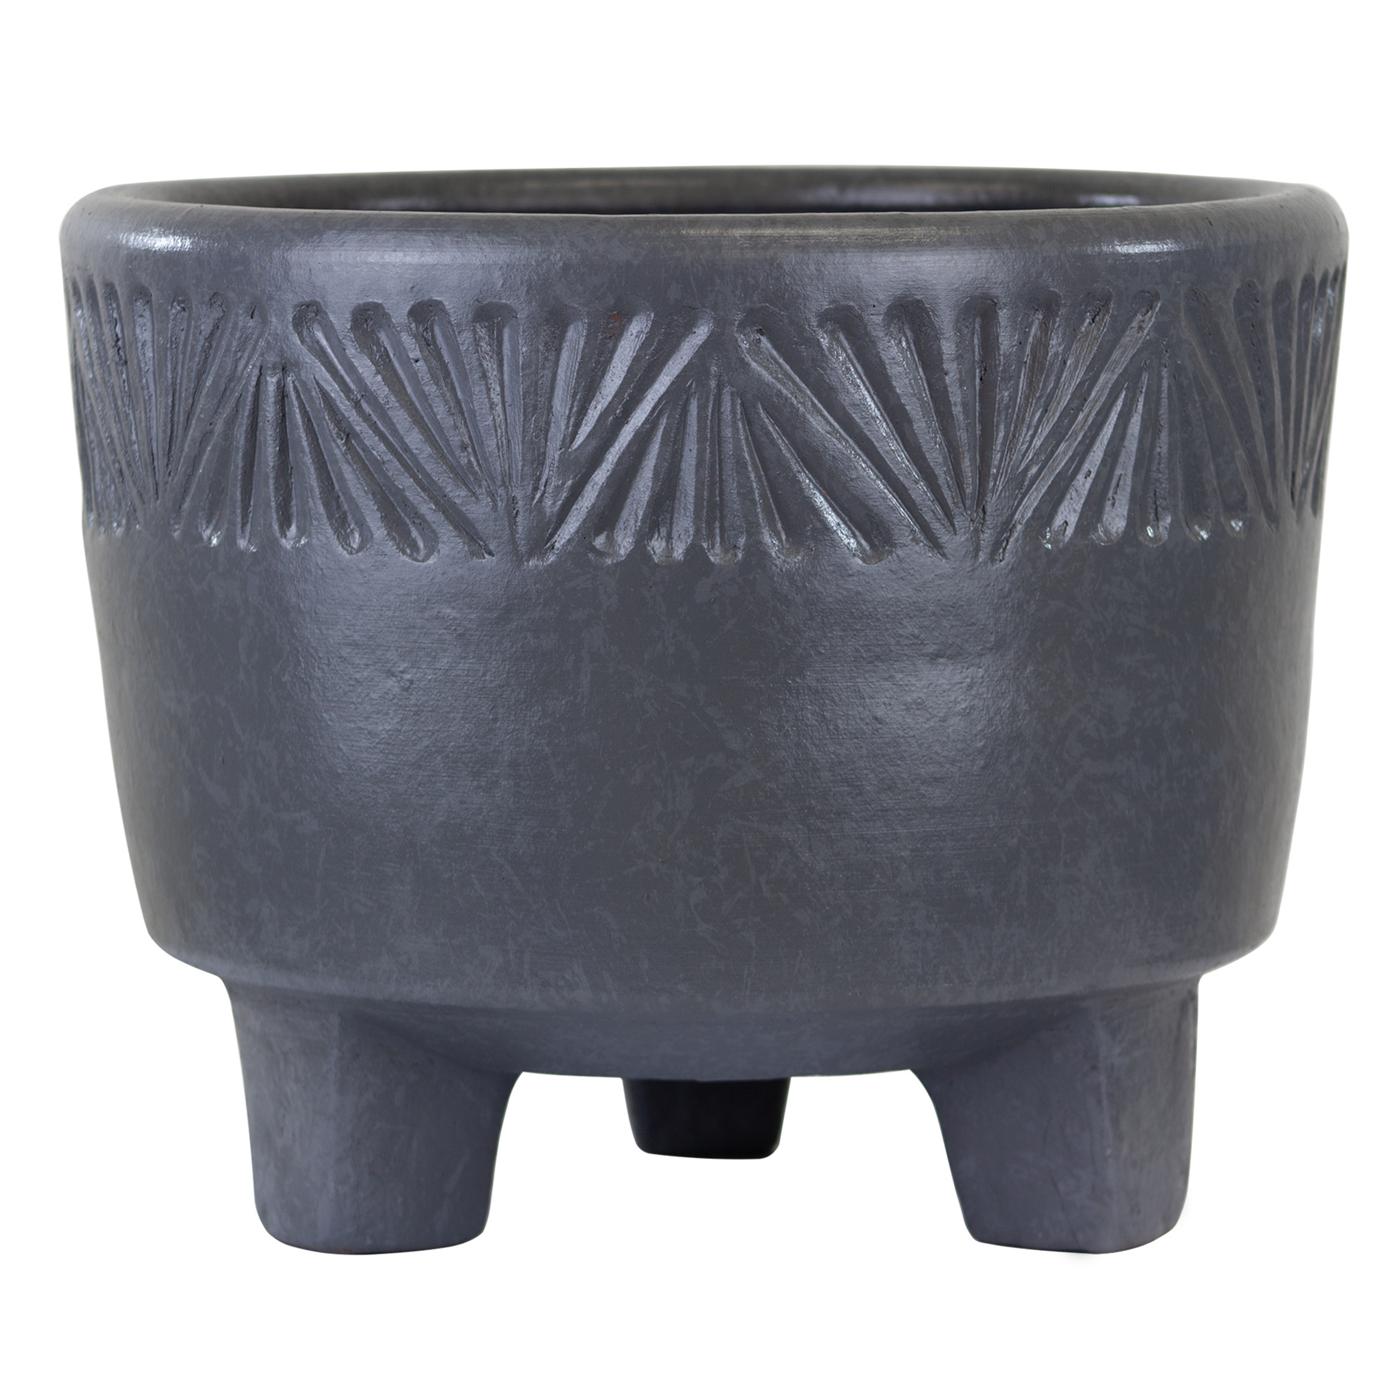 Trendspot Zona Footed Bowl Clay Planter - Charcoal; image 1 of 5